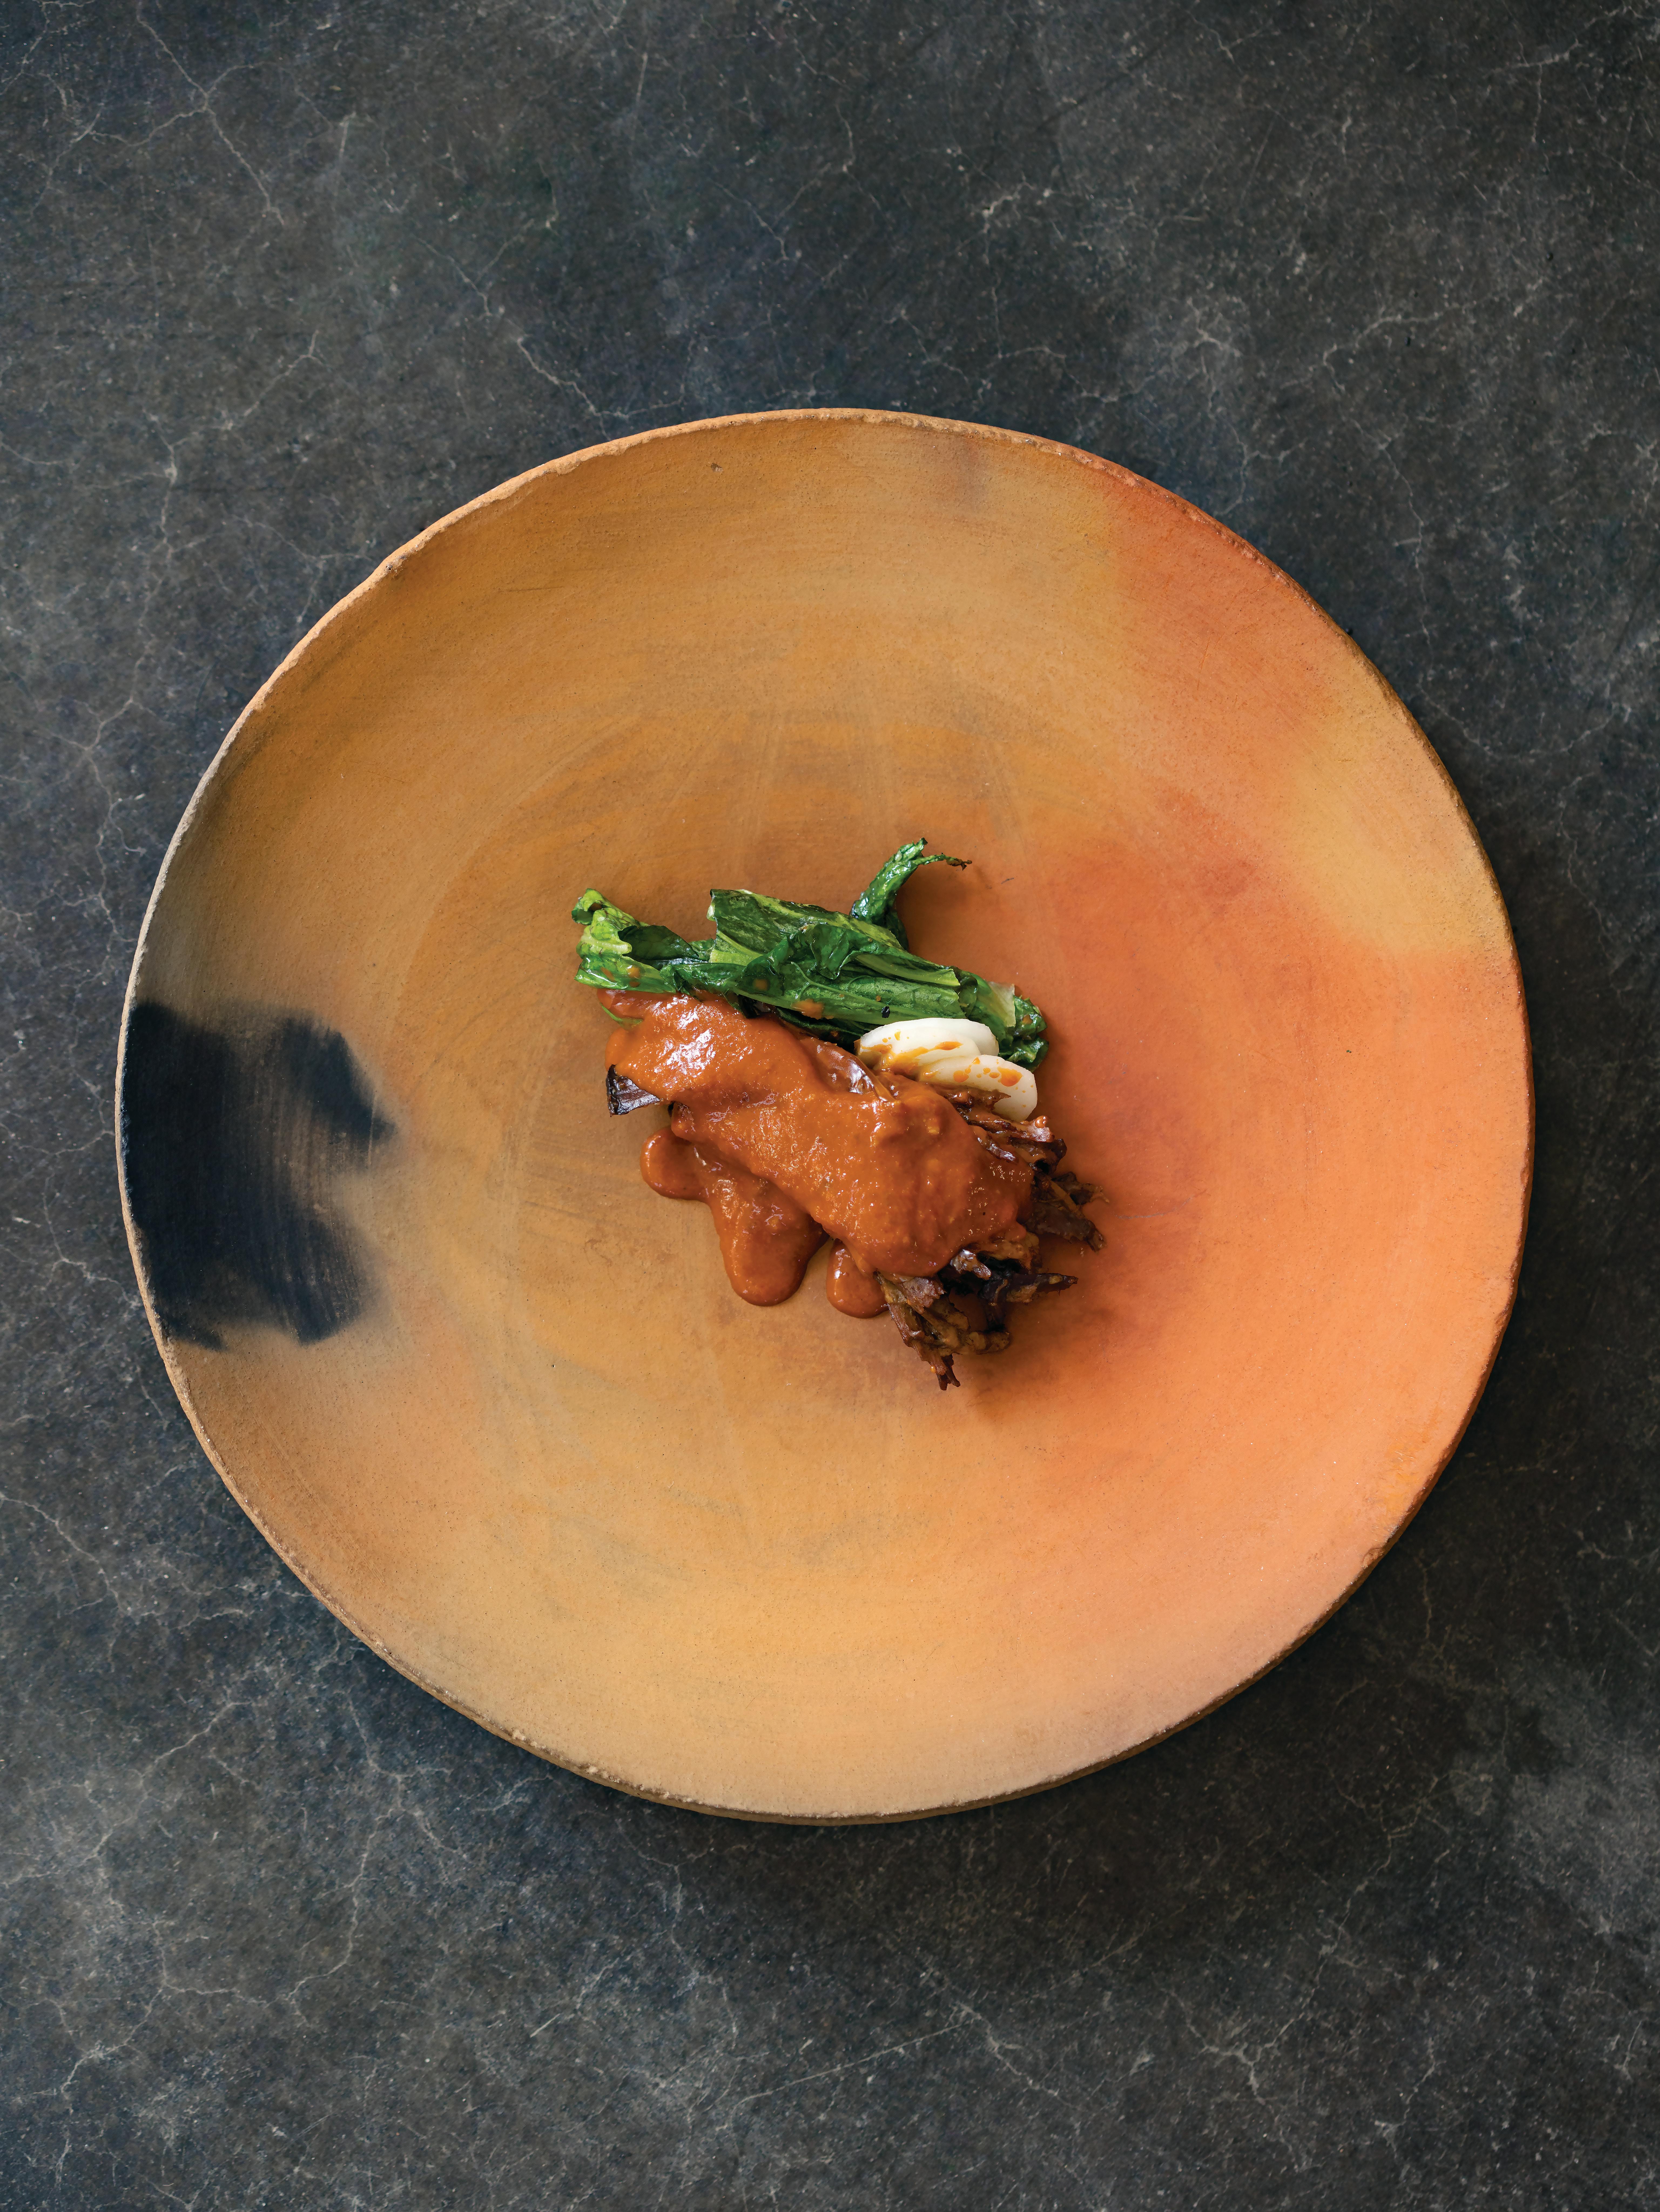 smooth orange plate with smoke smudge with artistically designed saucy beef dish in the center